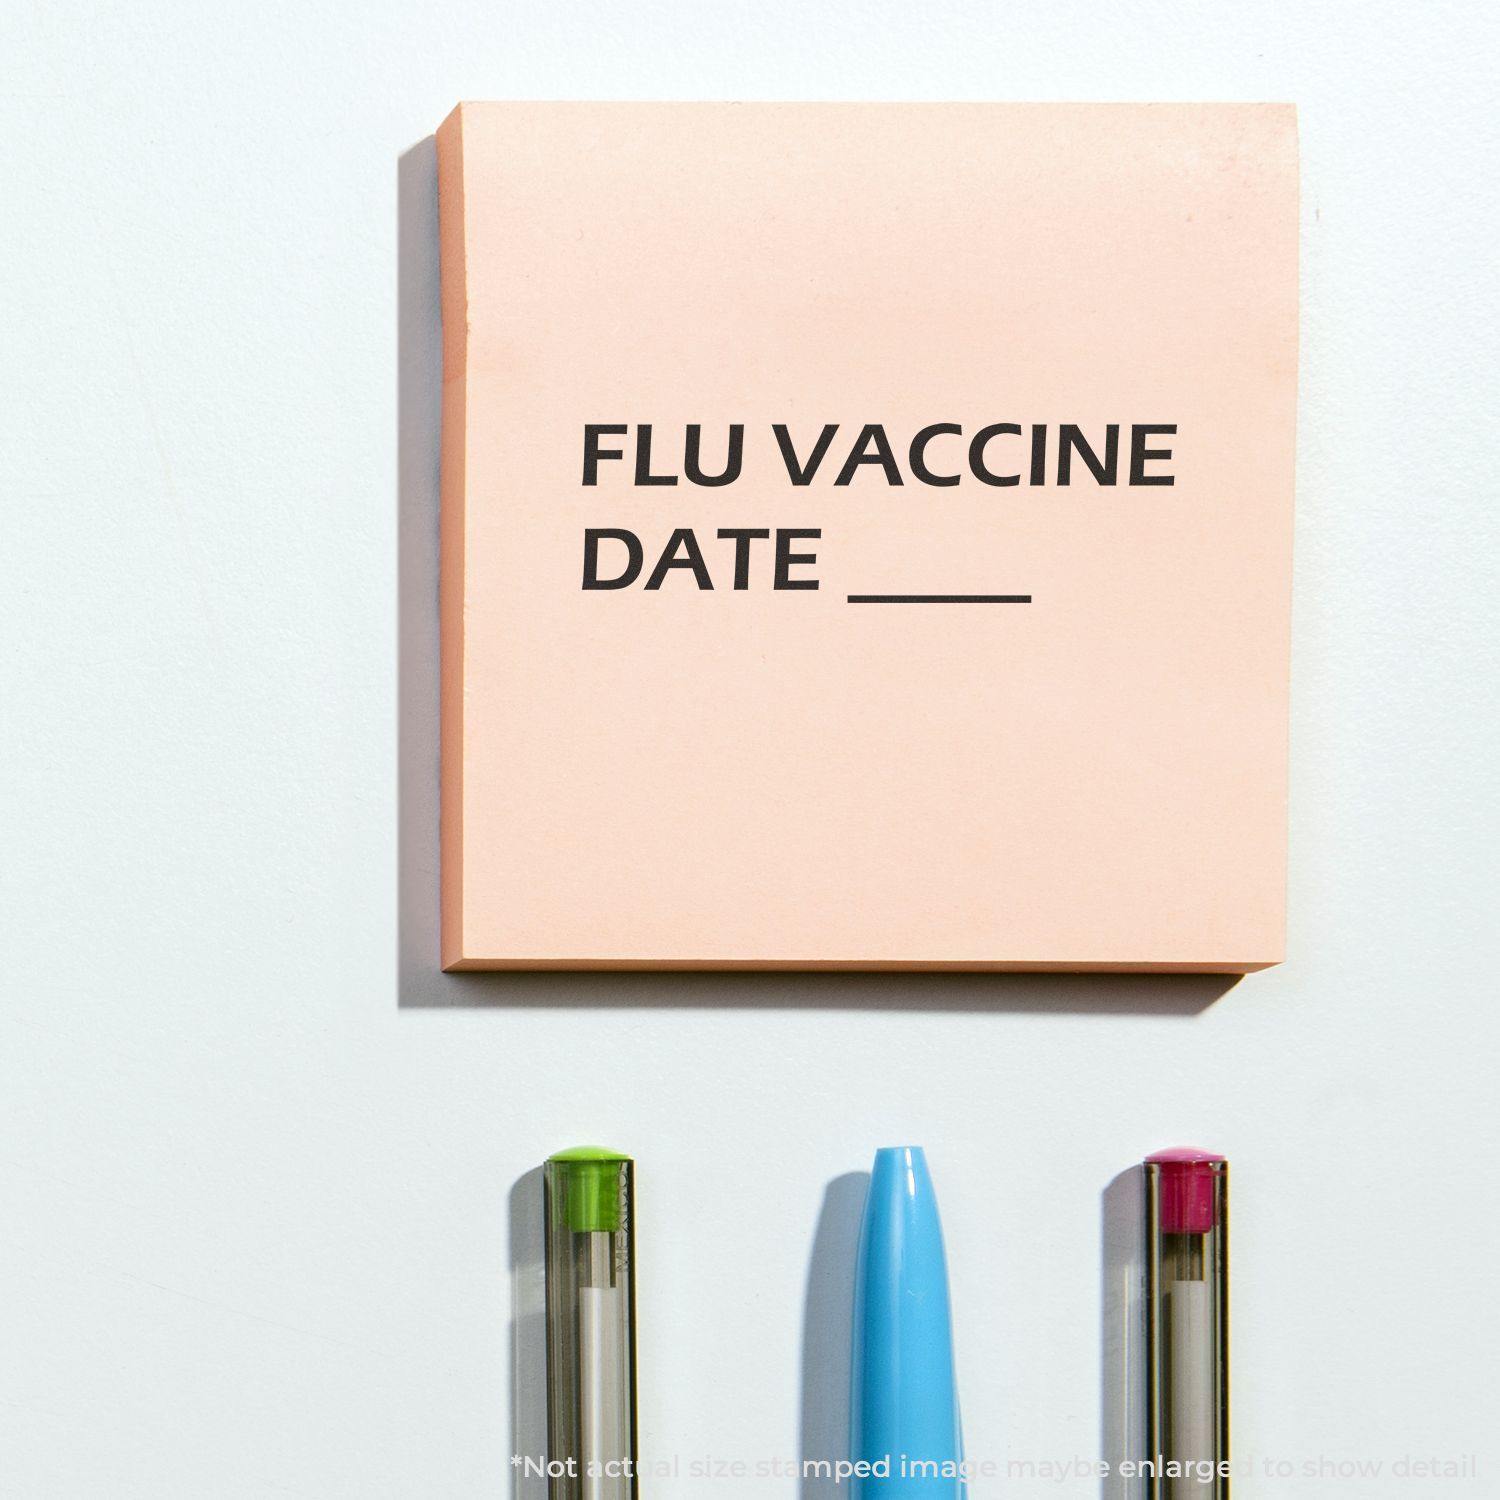 A self-inking stamp with a stamped image showing how the text "FLU VACCINE DATE" with a line is displayed after stamping.